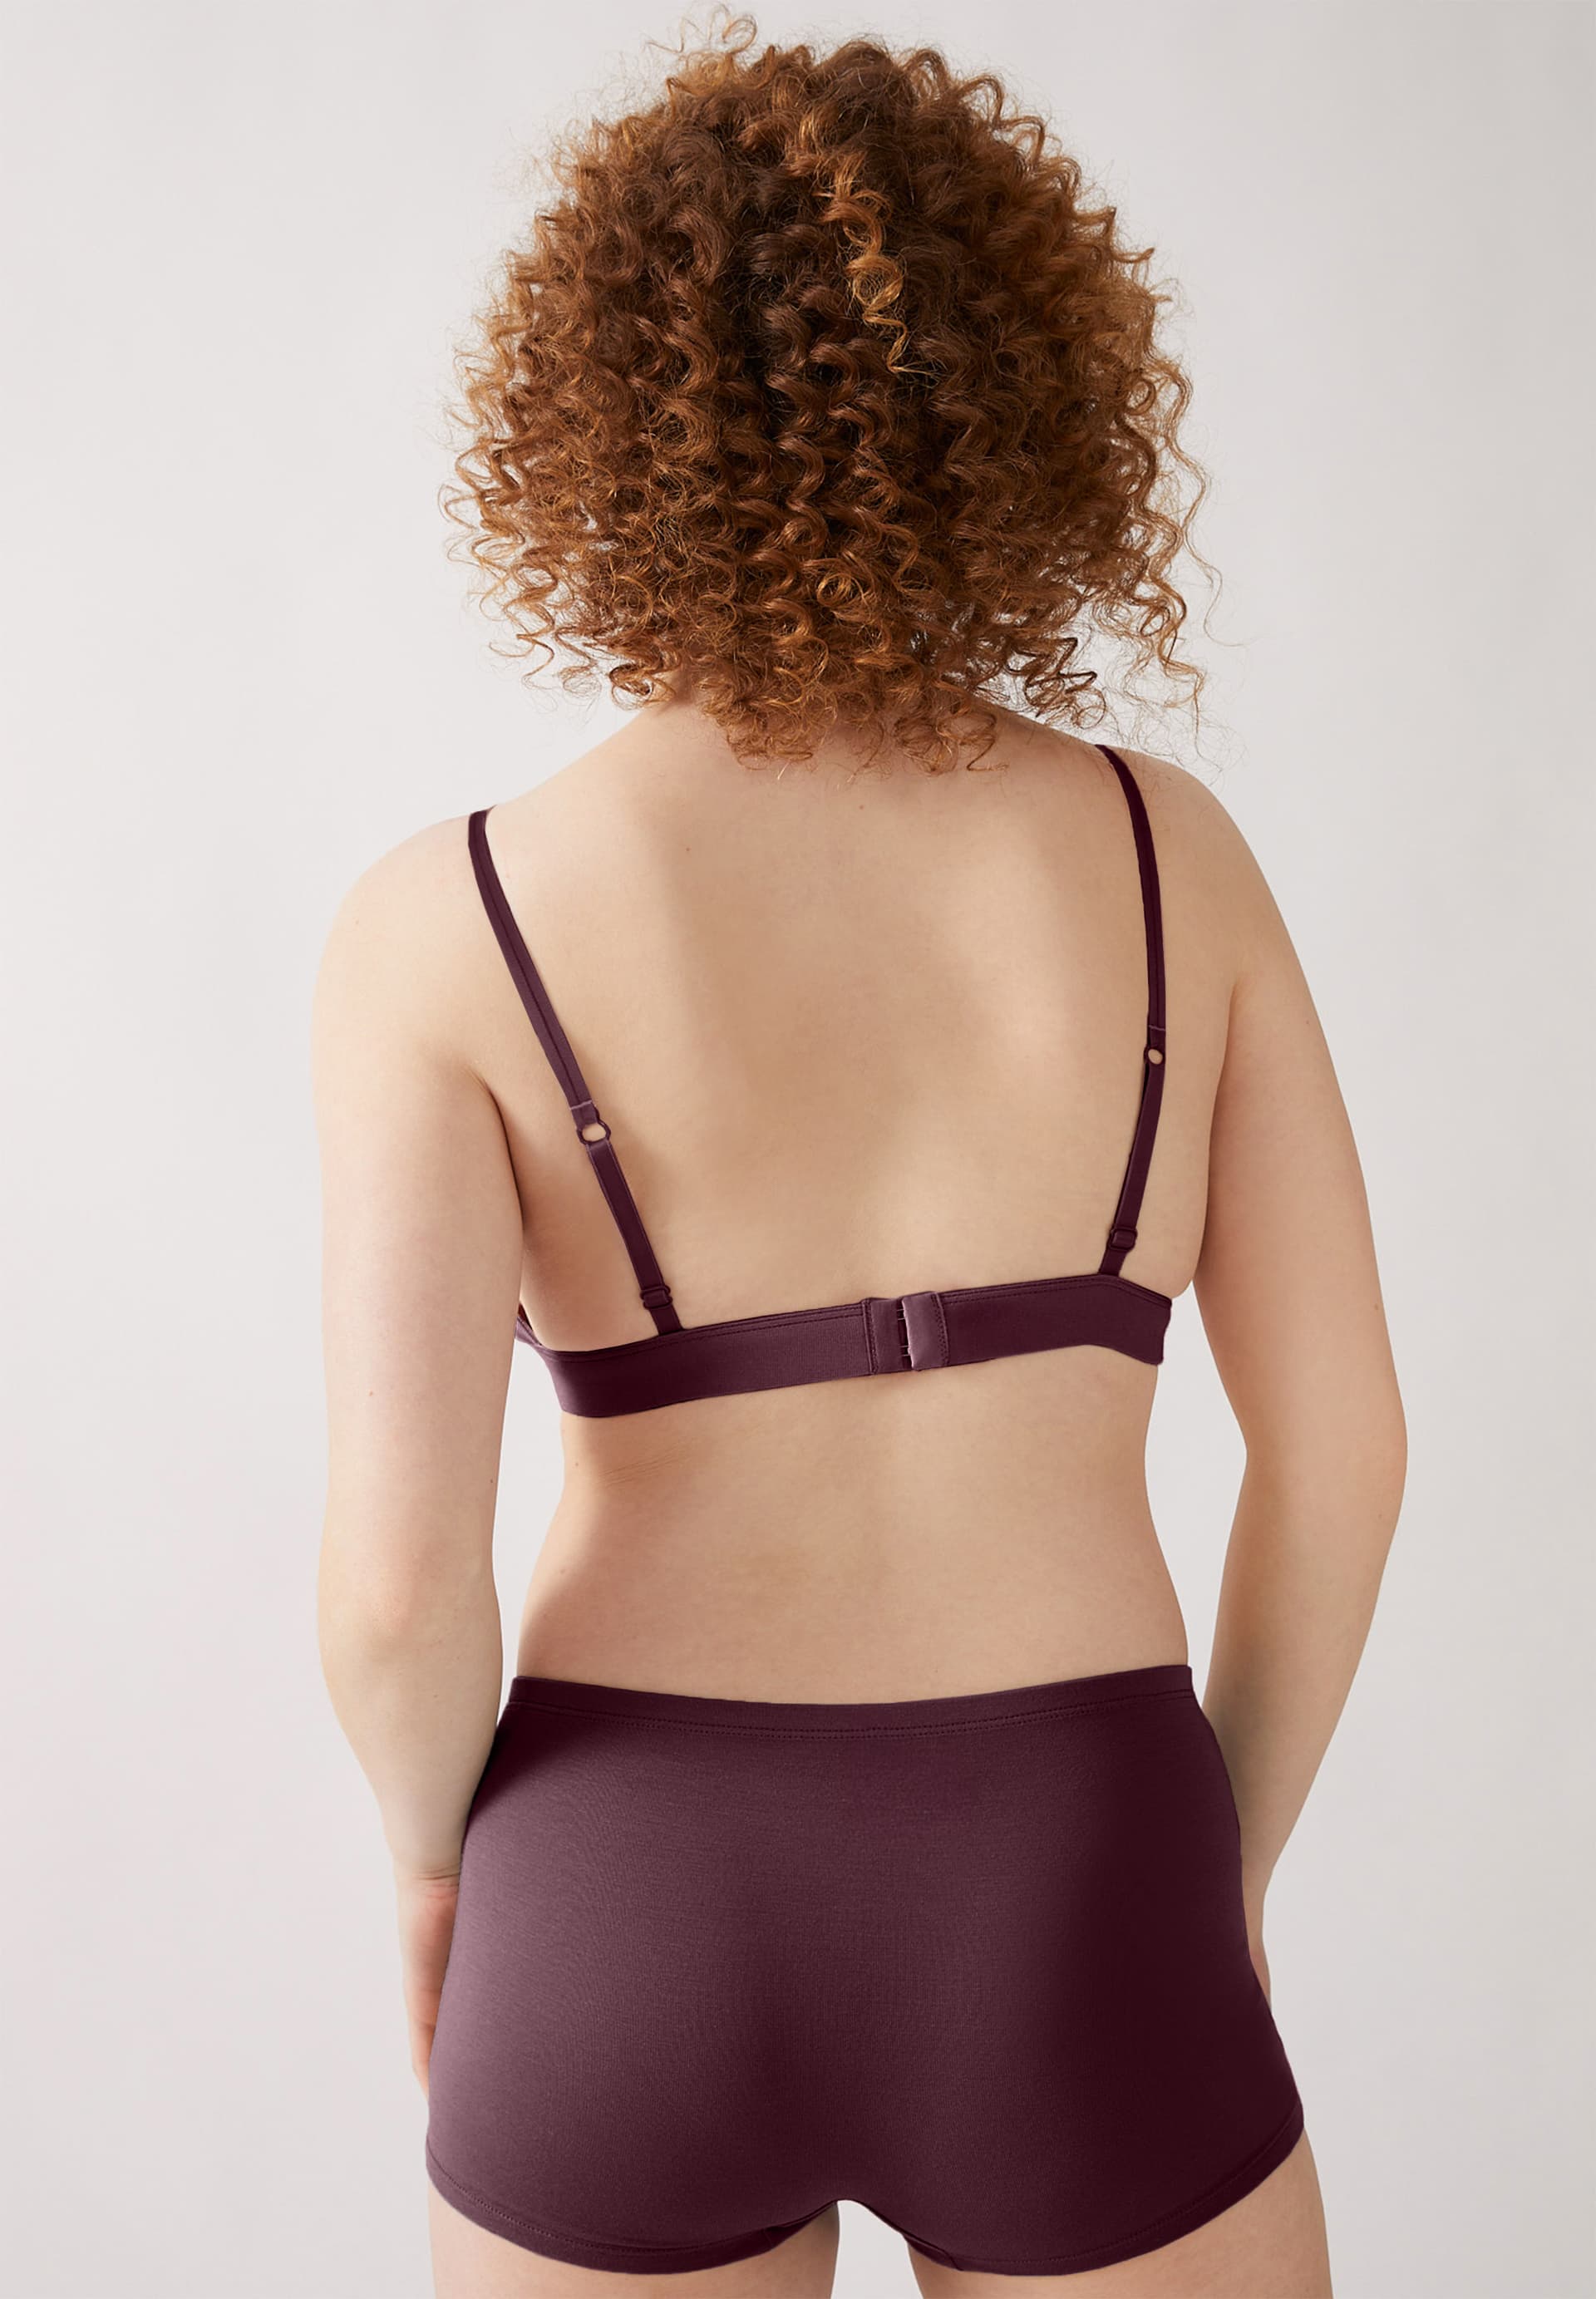 OSAAM Triangle Bralette made of TENCEL™ Modal Mix